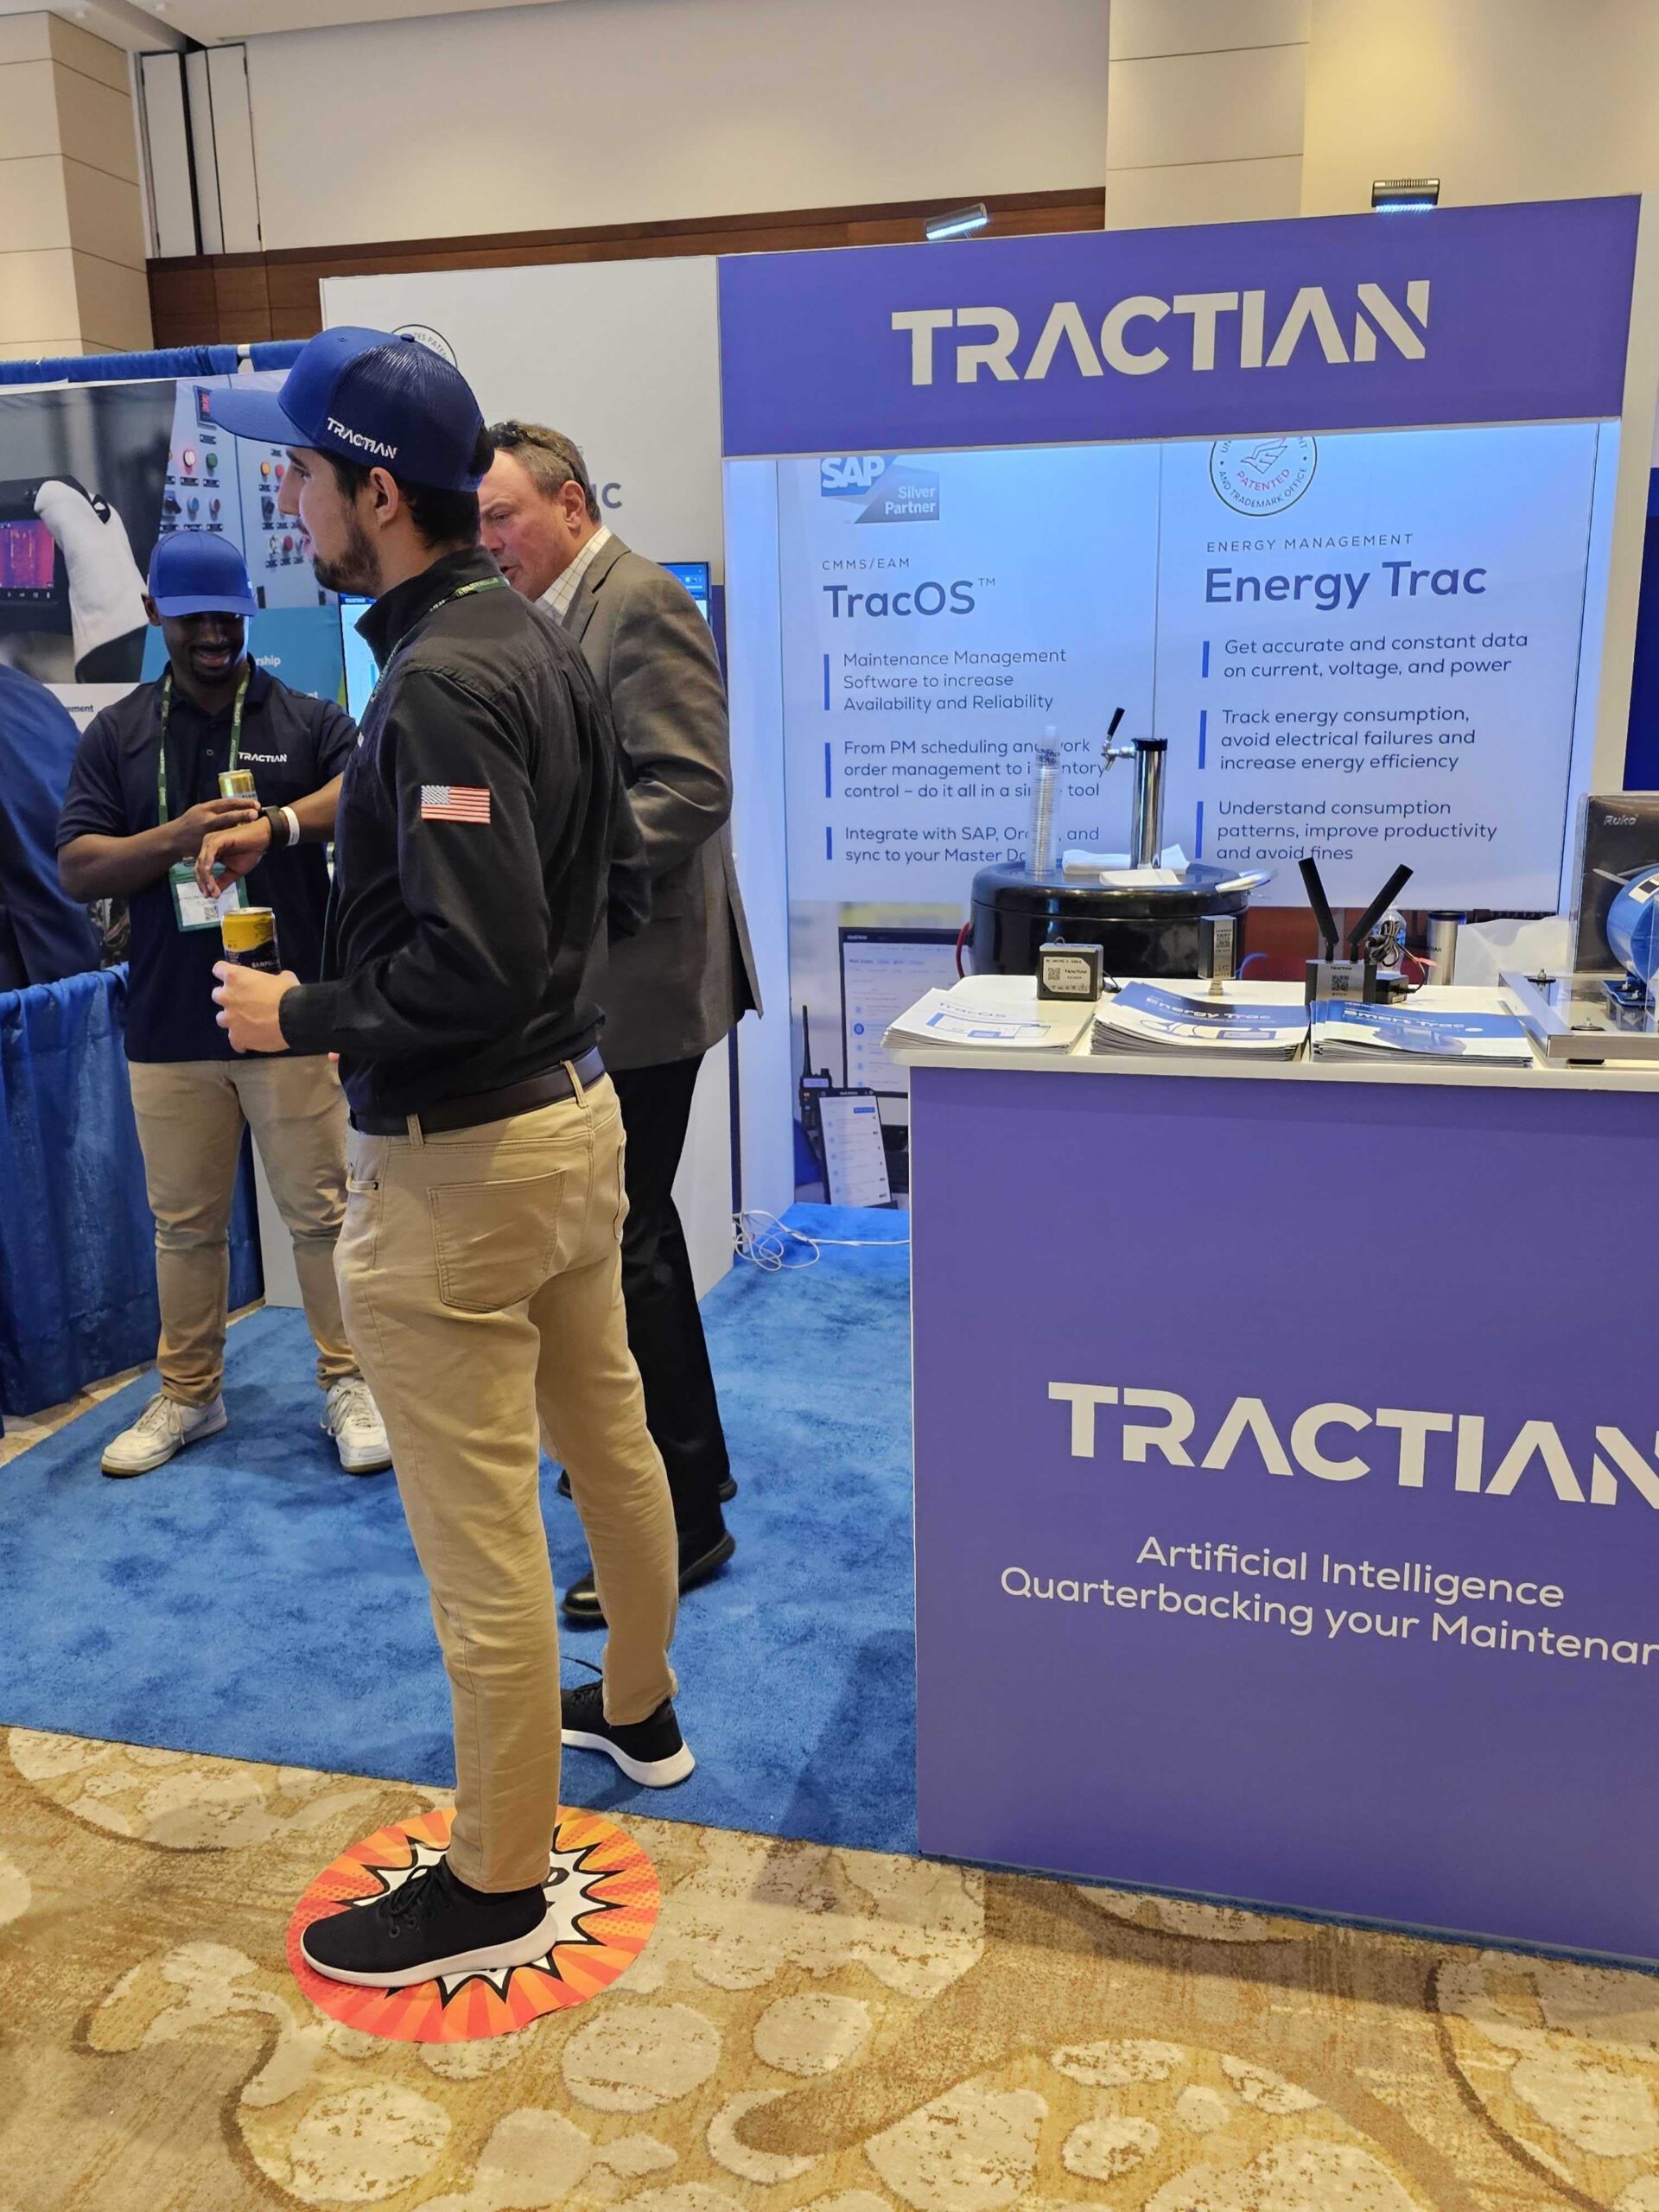 an image of the tractian booth